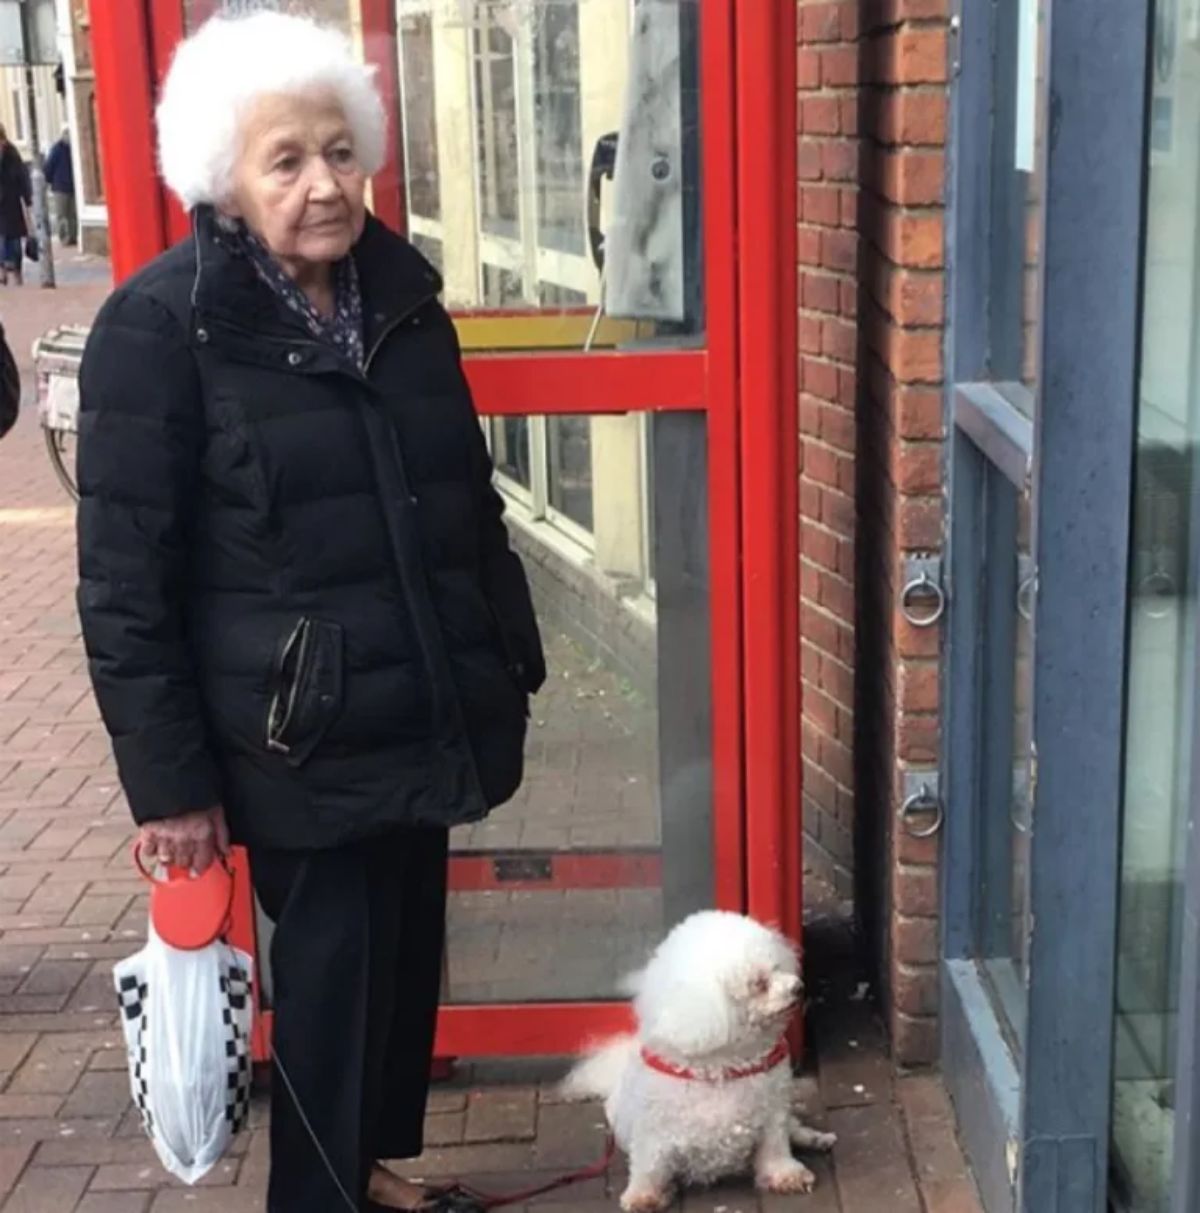 old fluffy small poodle with an old woman with curly white hair